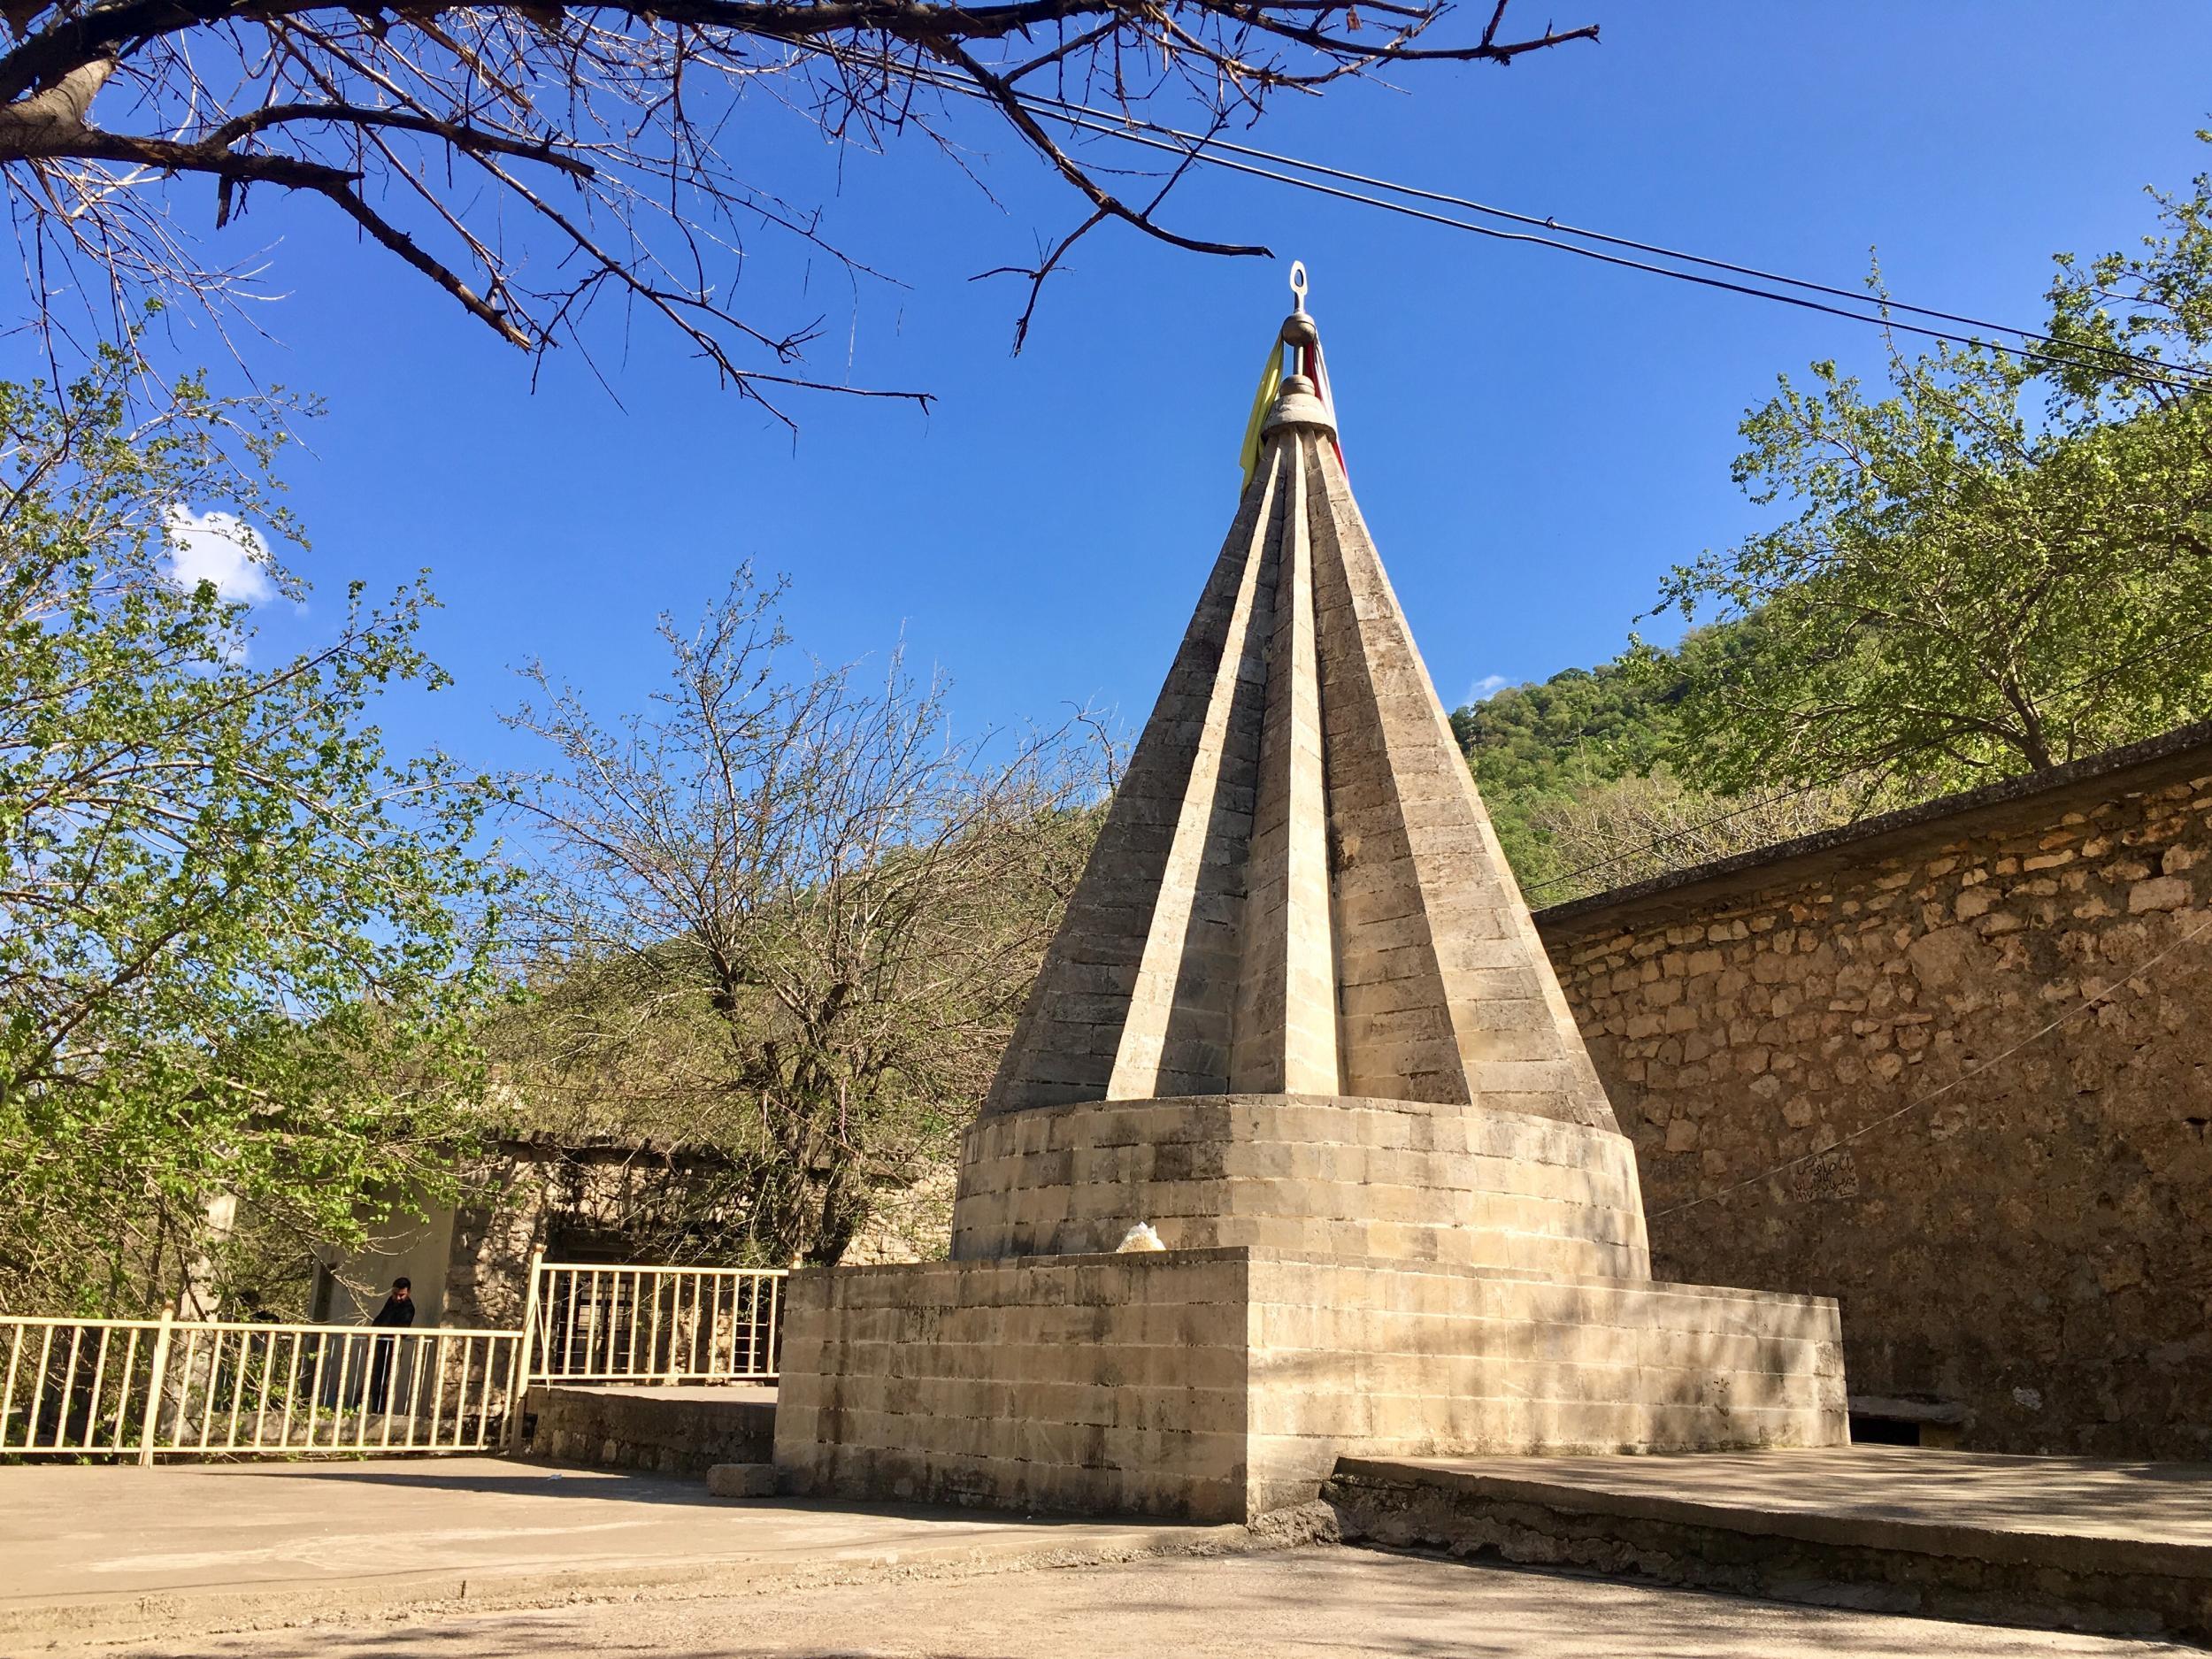 &#13;
Lalish is dotted with conical holy structures &#13;